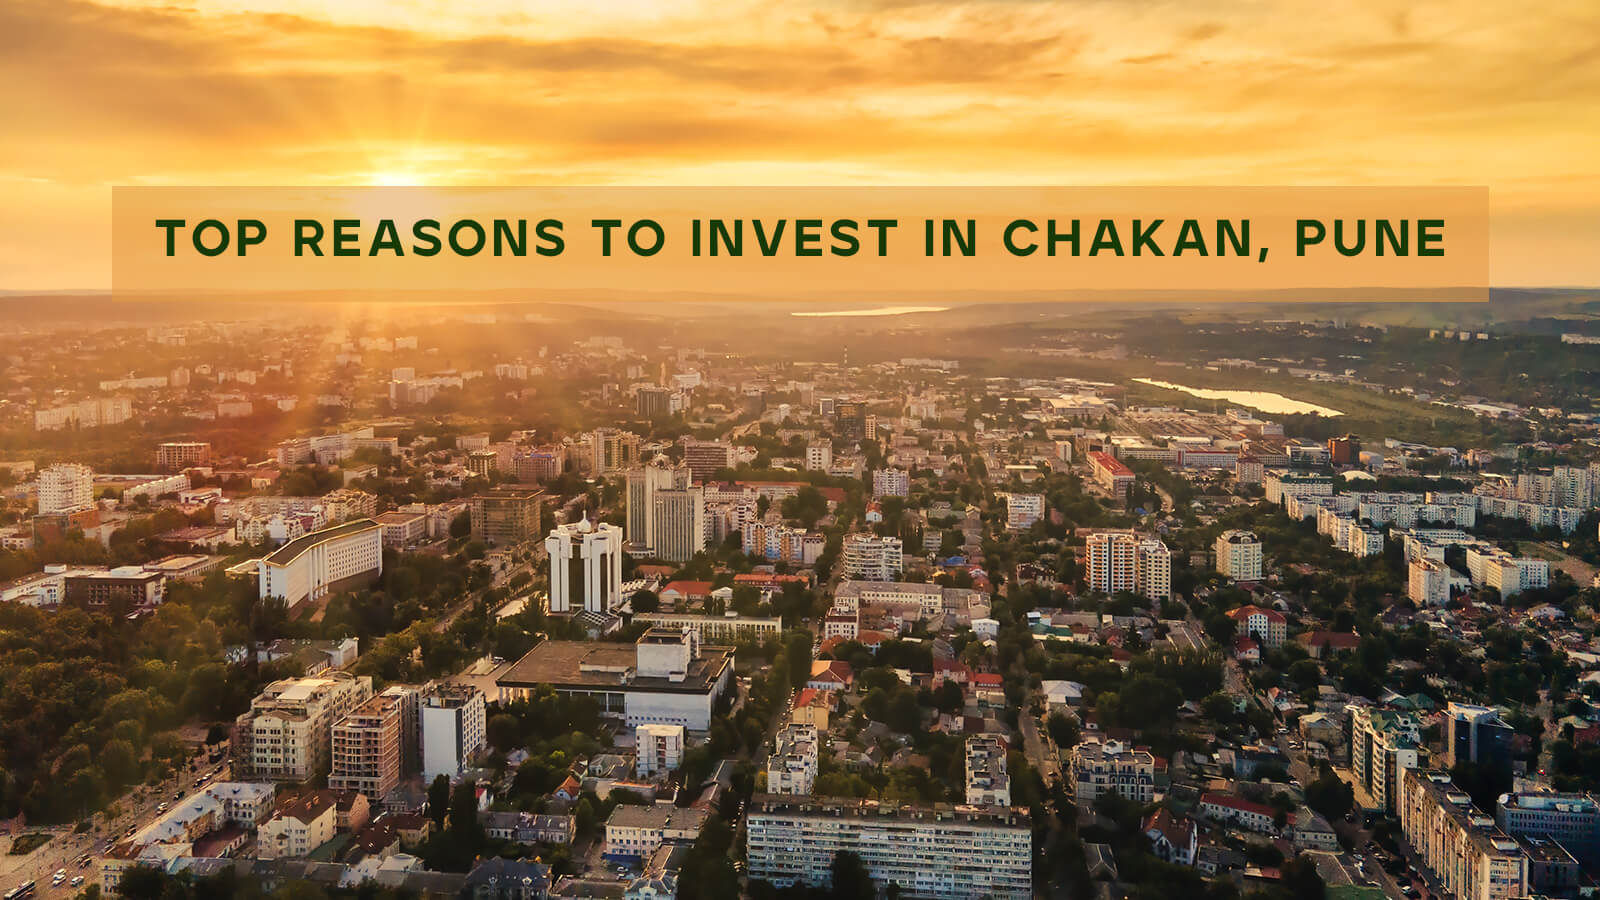 Top Reasons To Invest in Chakan, Pune